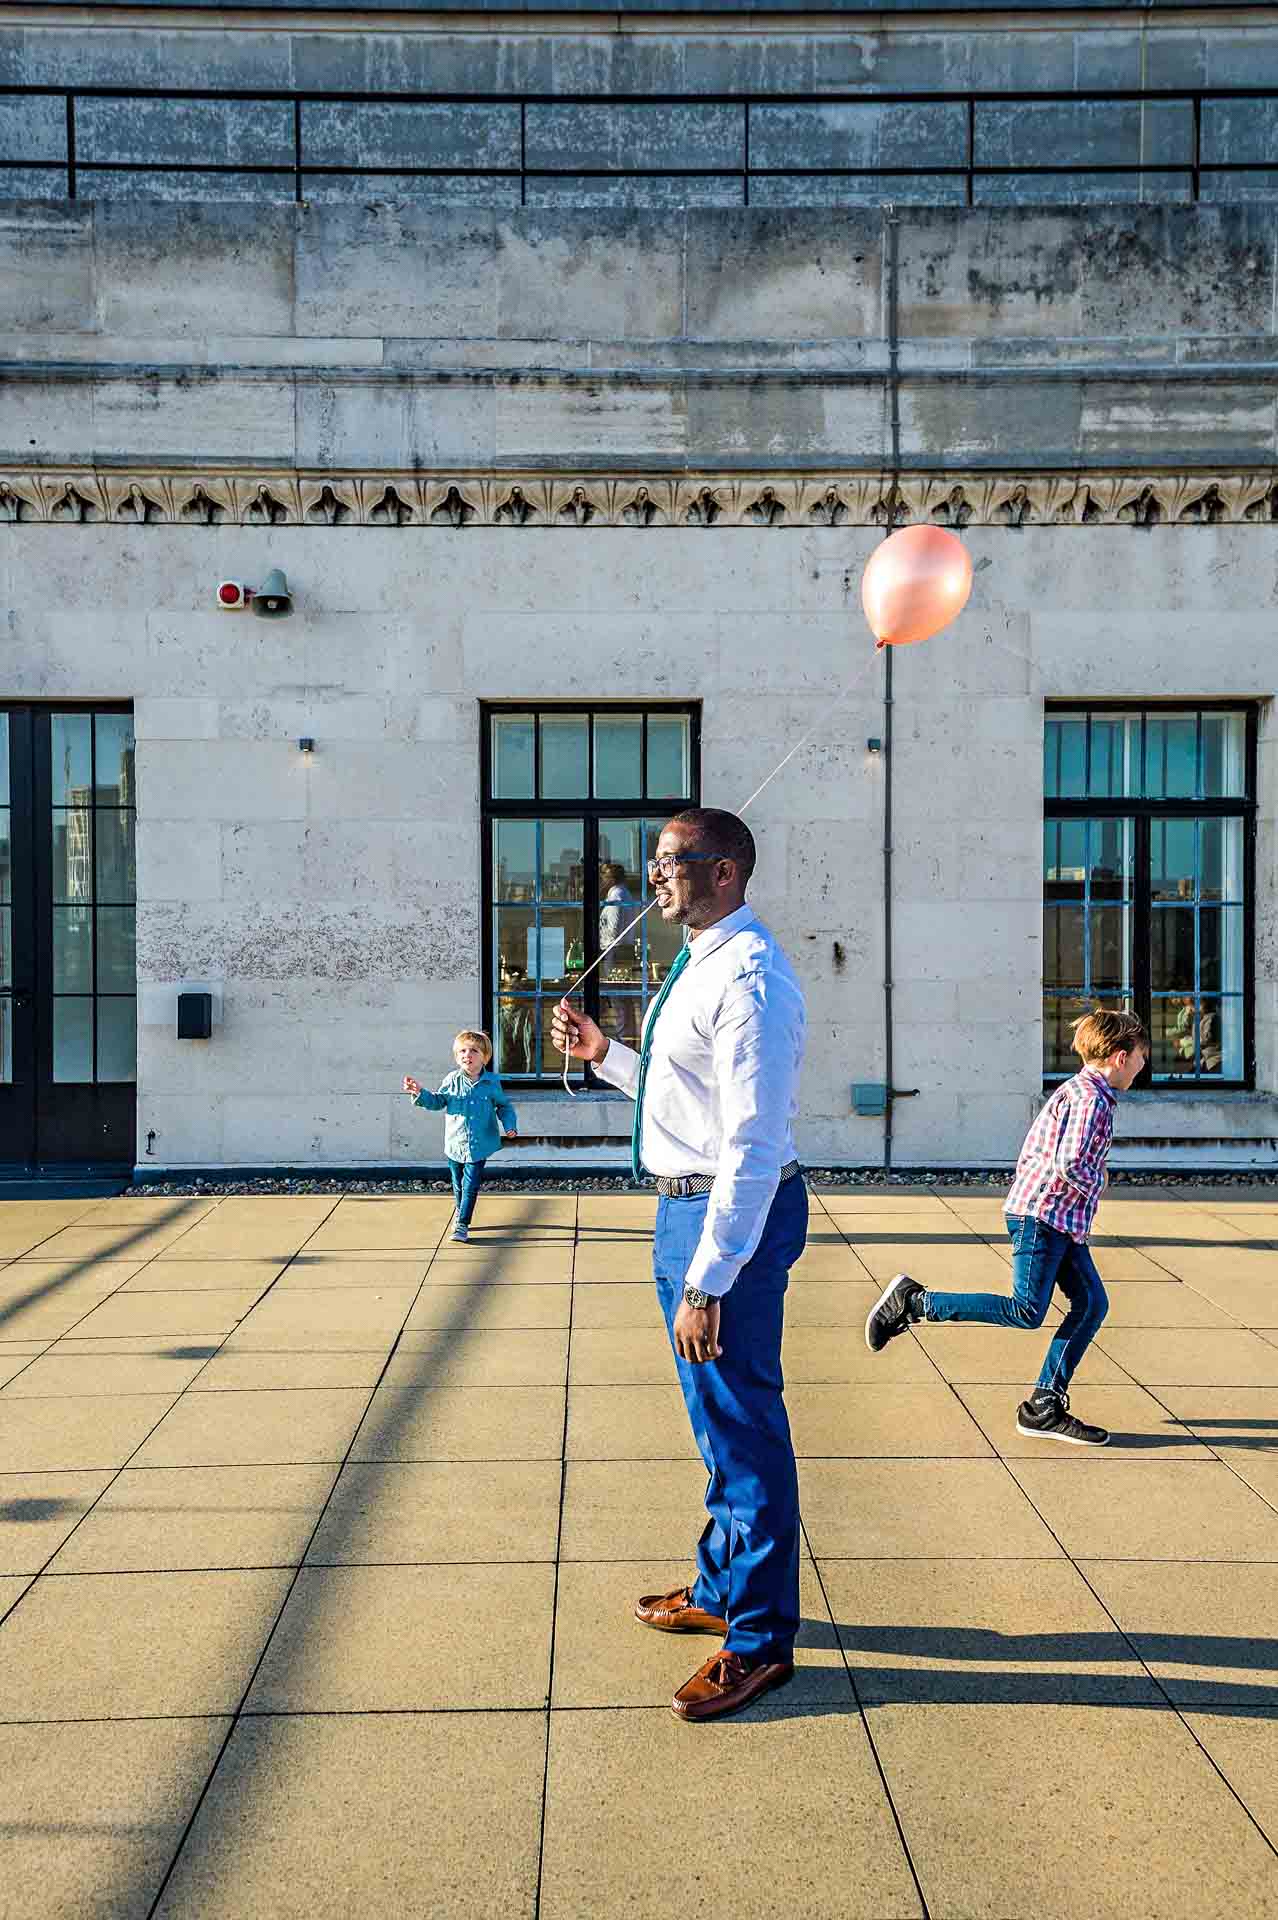 Man standing with balloon whilst children play.